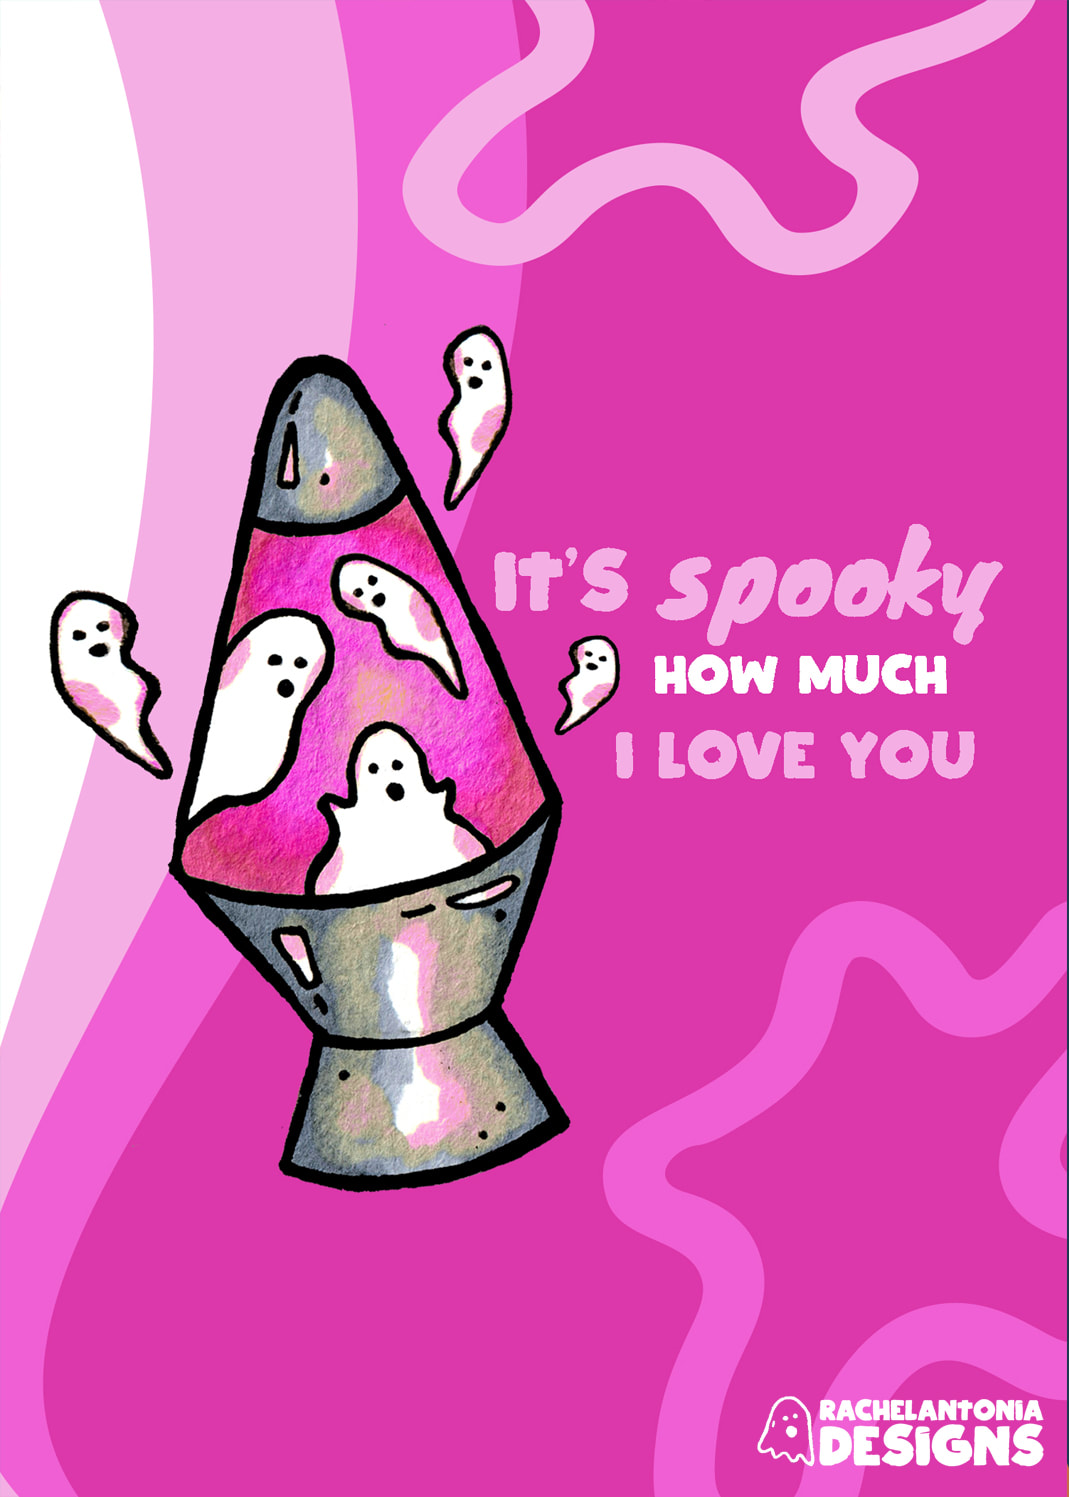 Image of a card thats pink and white and says It's spooky how much I love you with lava lamps on it